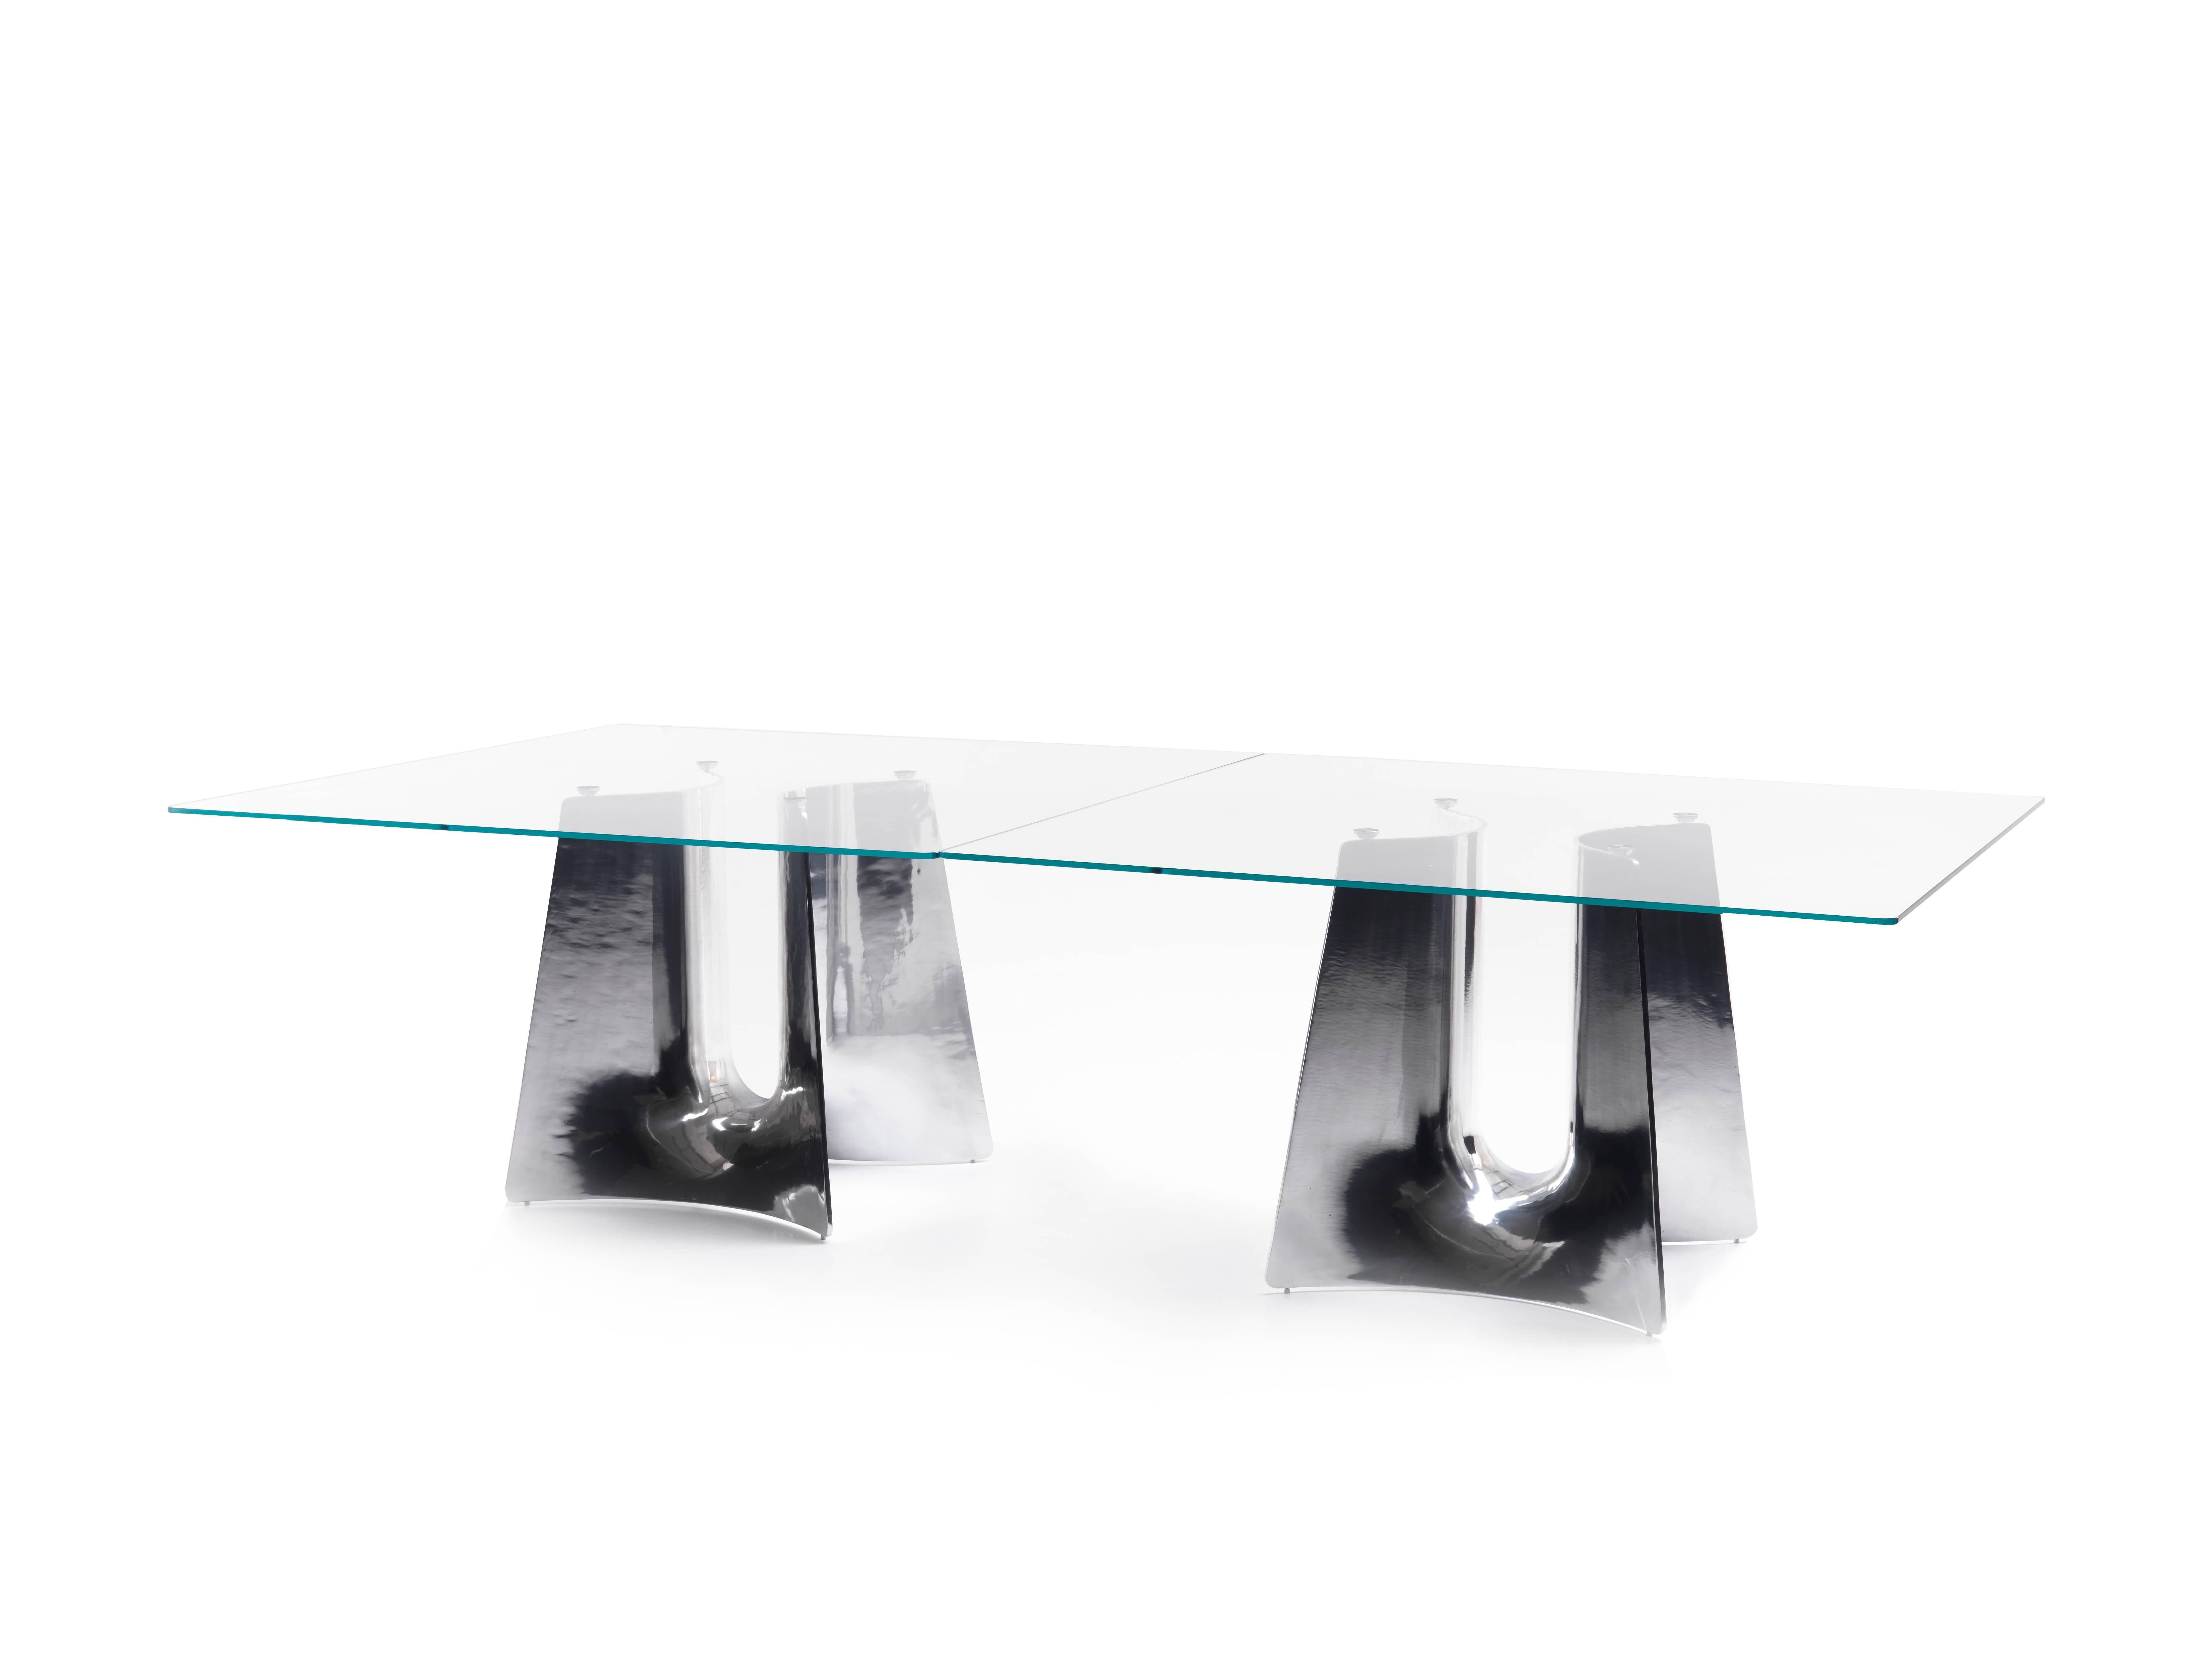 The form of the Bentz table base derives from a simple profile swept along a down and up trajectory. In doing so, it creates an airy and sculptural central focus with the functional characteristics of a column base. The resulting surface and volume